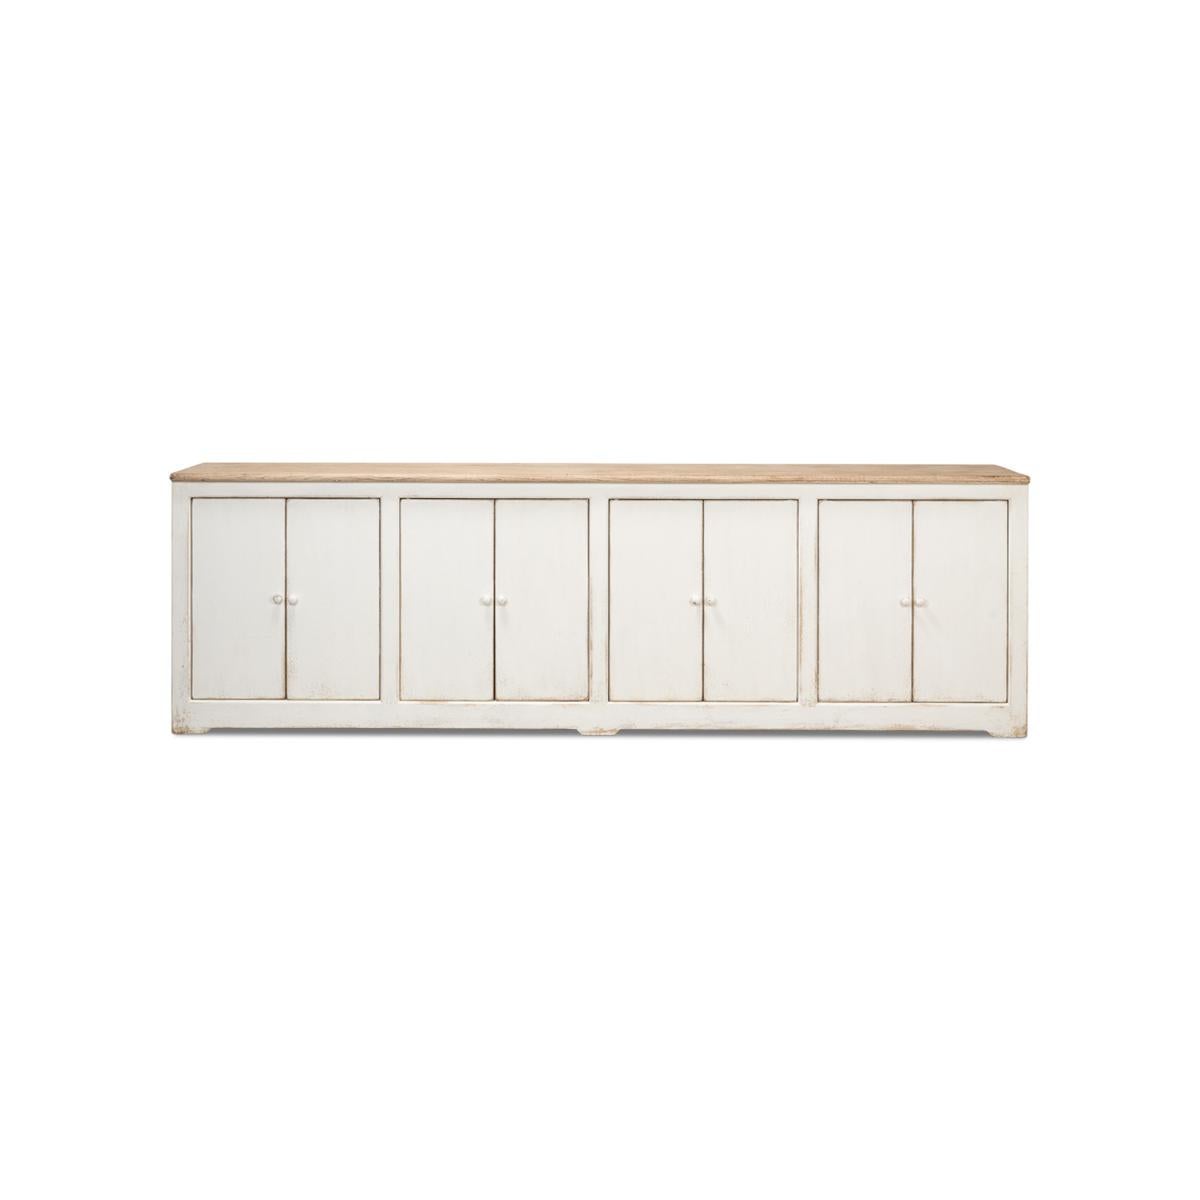 An eight door pine sideboard cabinet with a soft painted rub through antiqued whitewash finish with a natural finish top. Doors open to reveal a painted interior with removable shelves.

Dimensions: 122